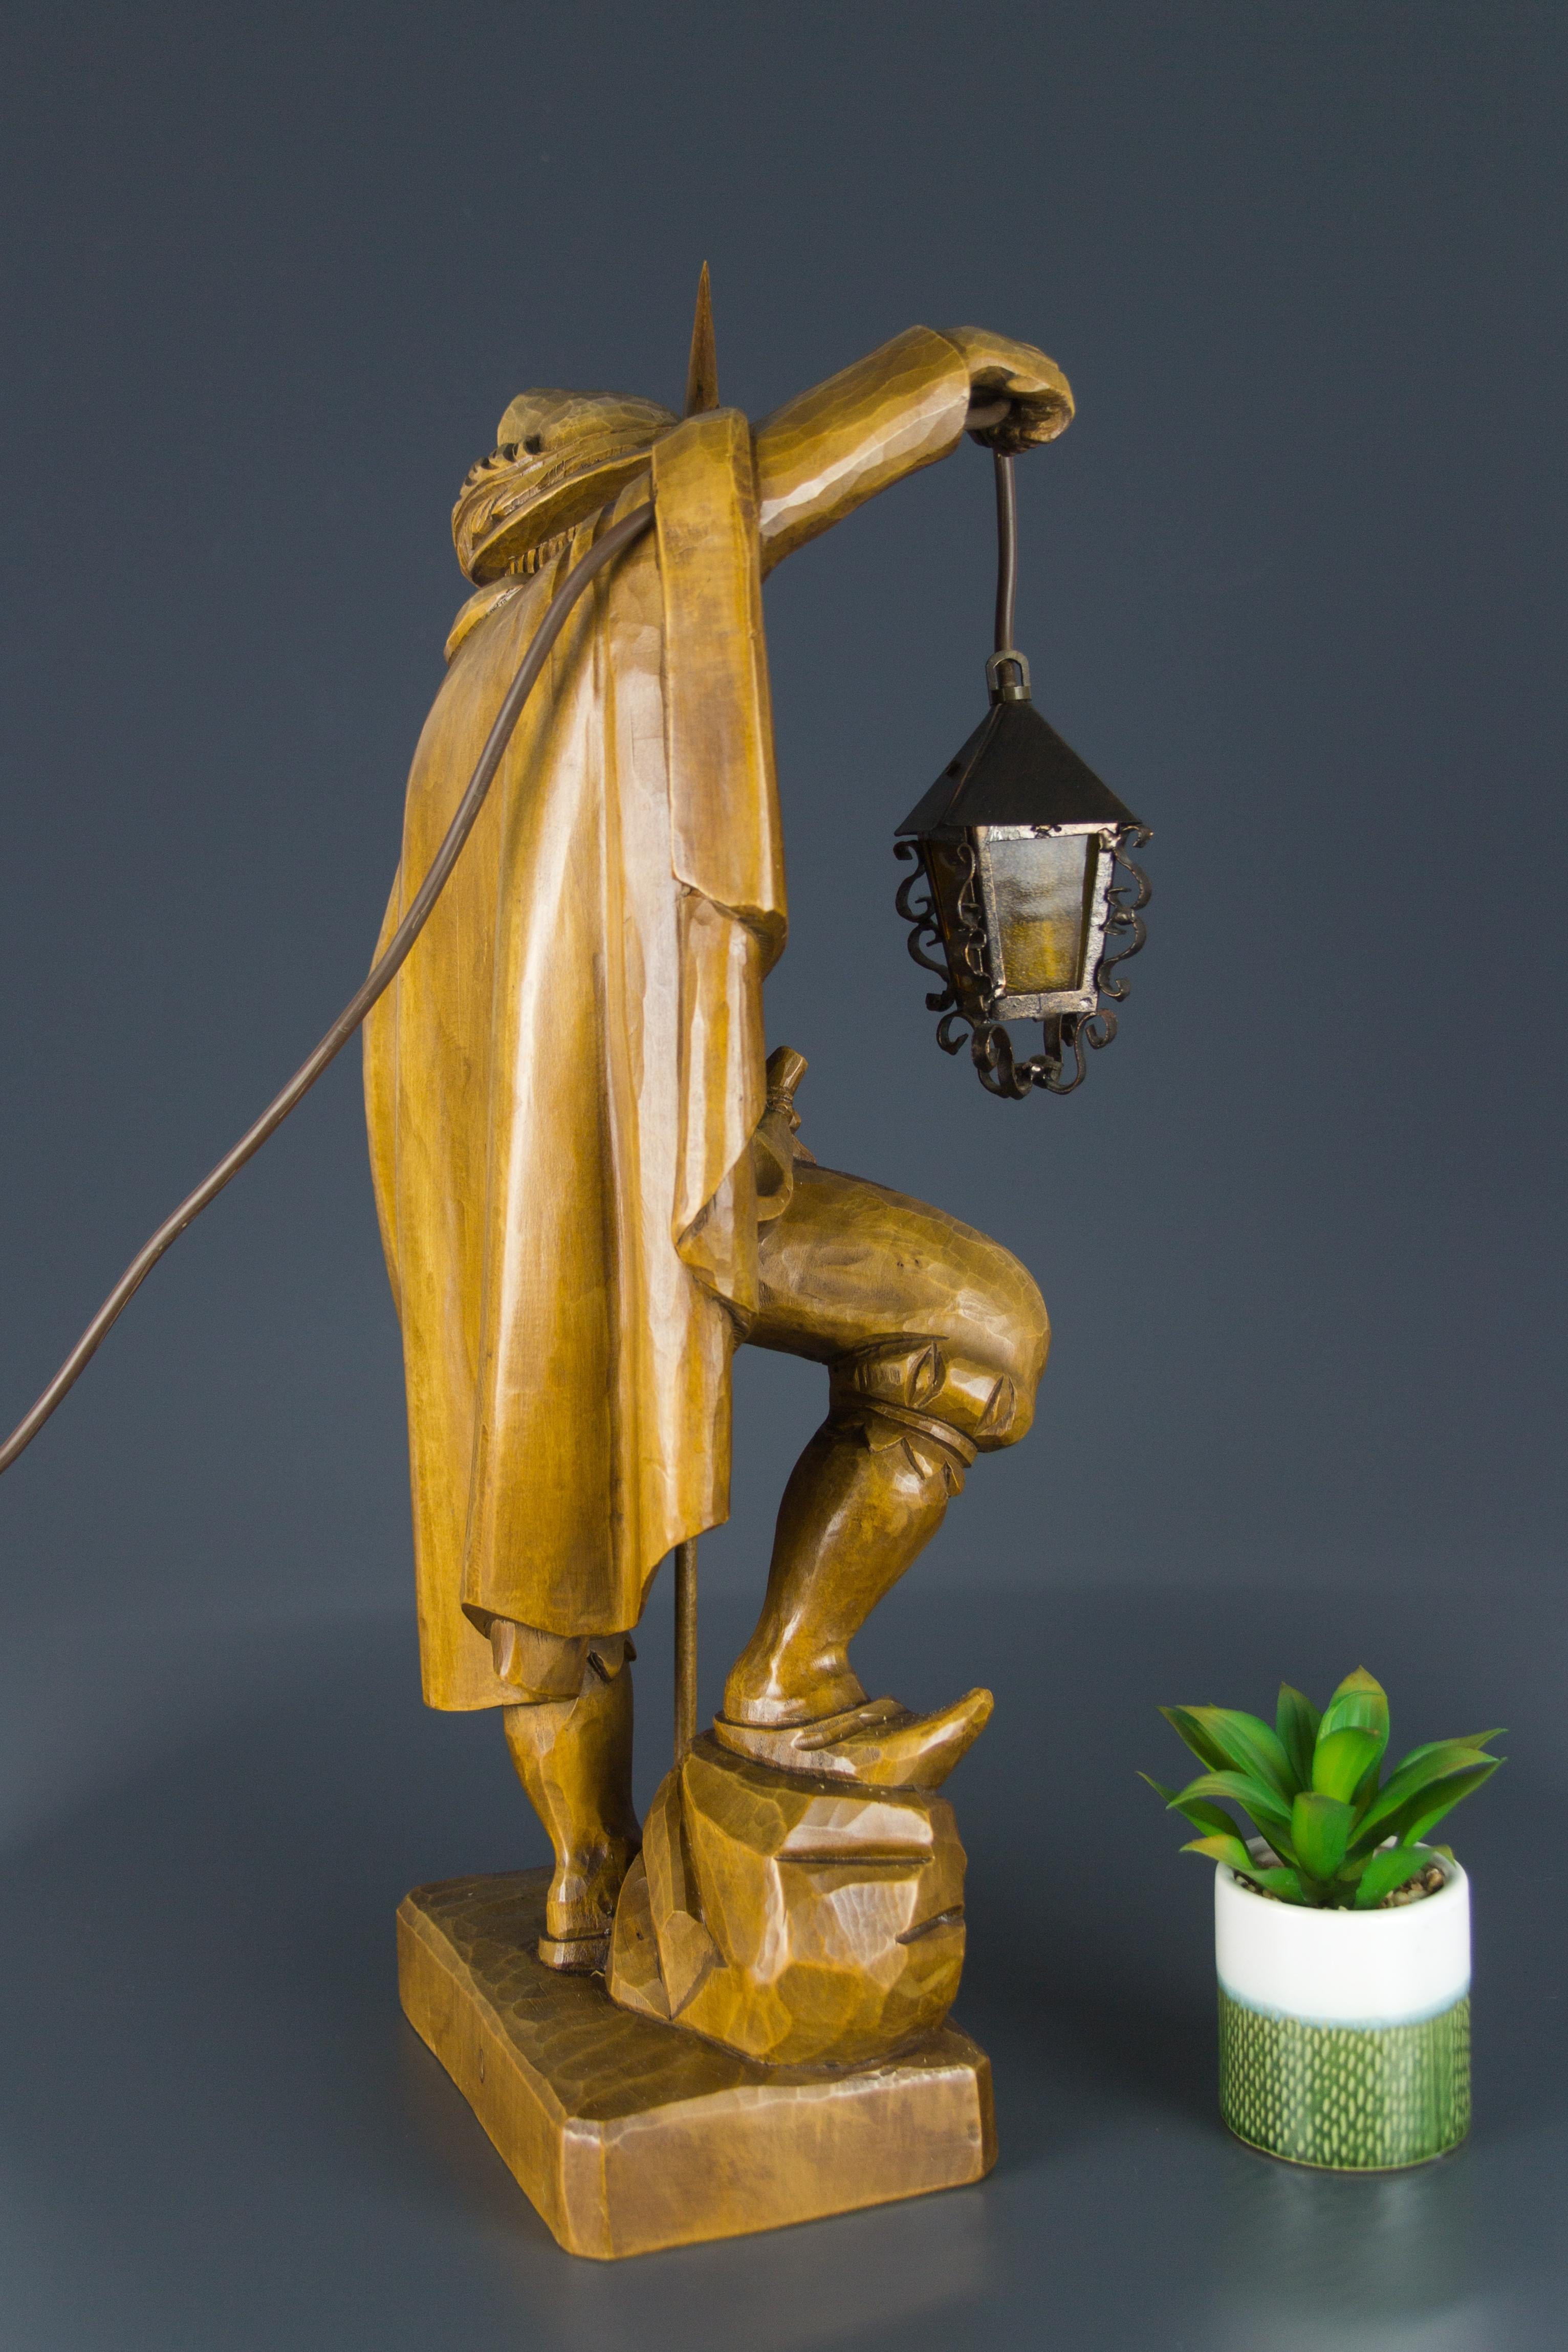 Hand-Carved German Hand Carved Wooden Figurative Sculpture Lamp Night Watchman with Lantern